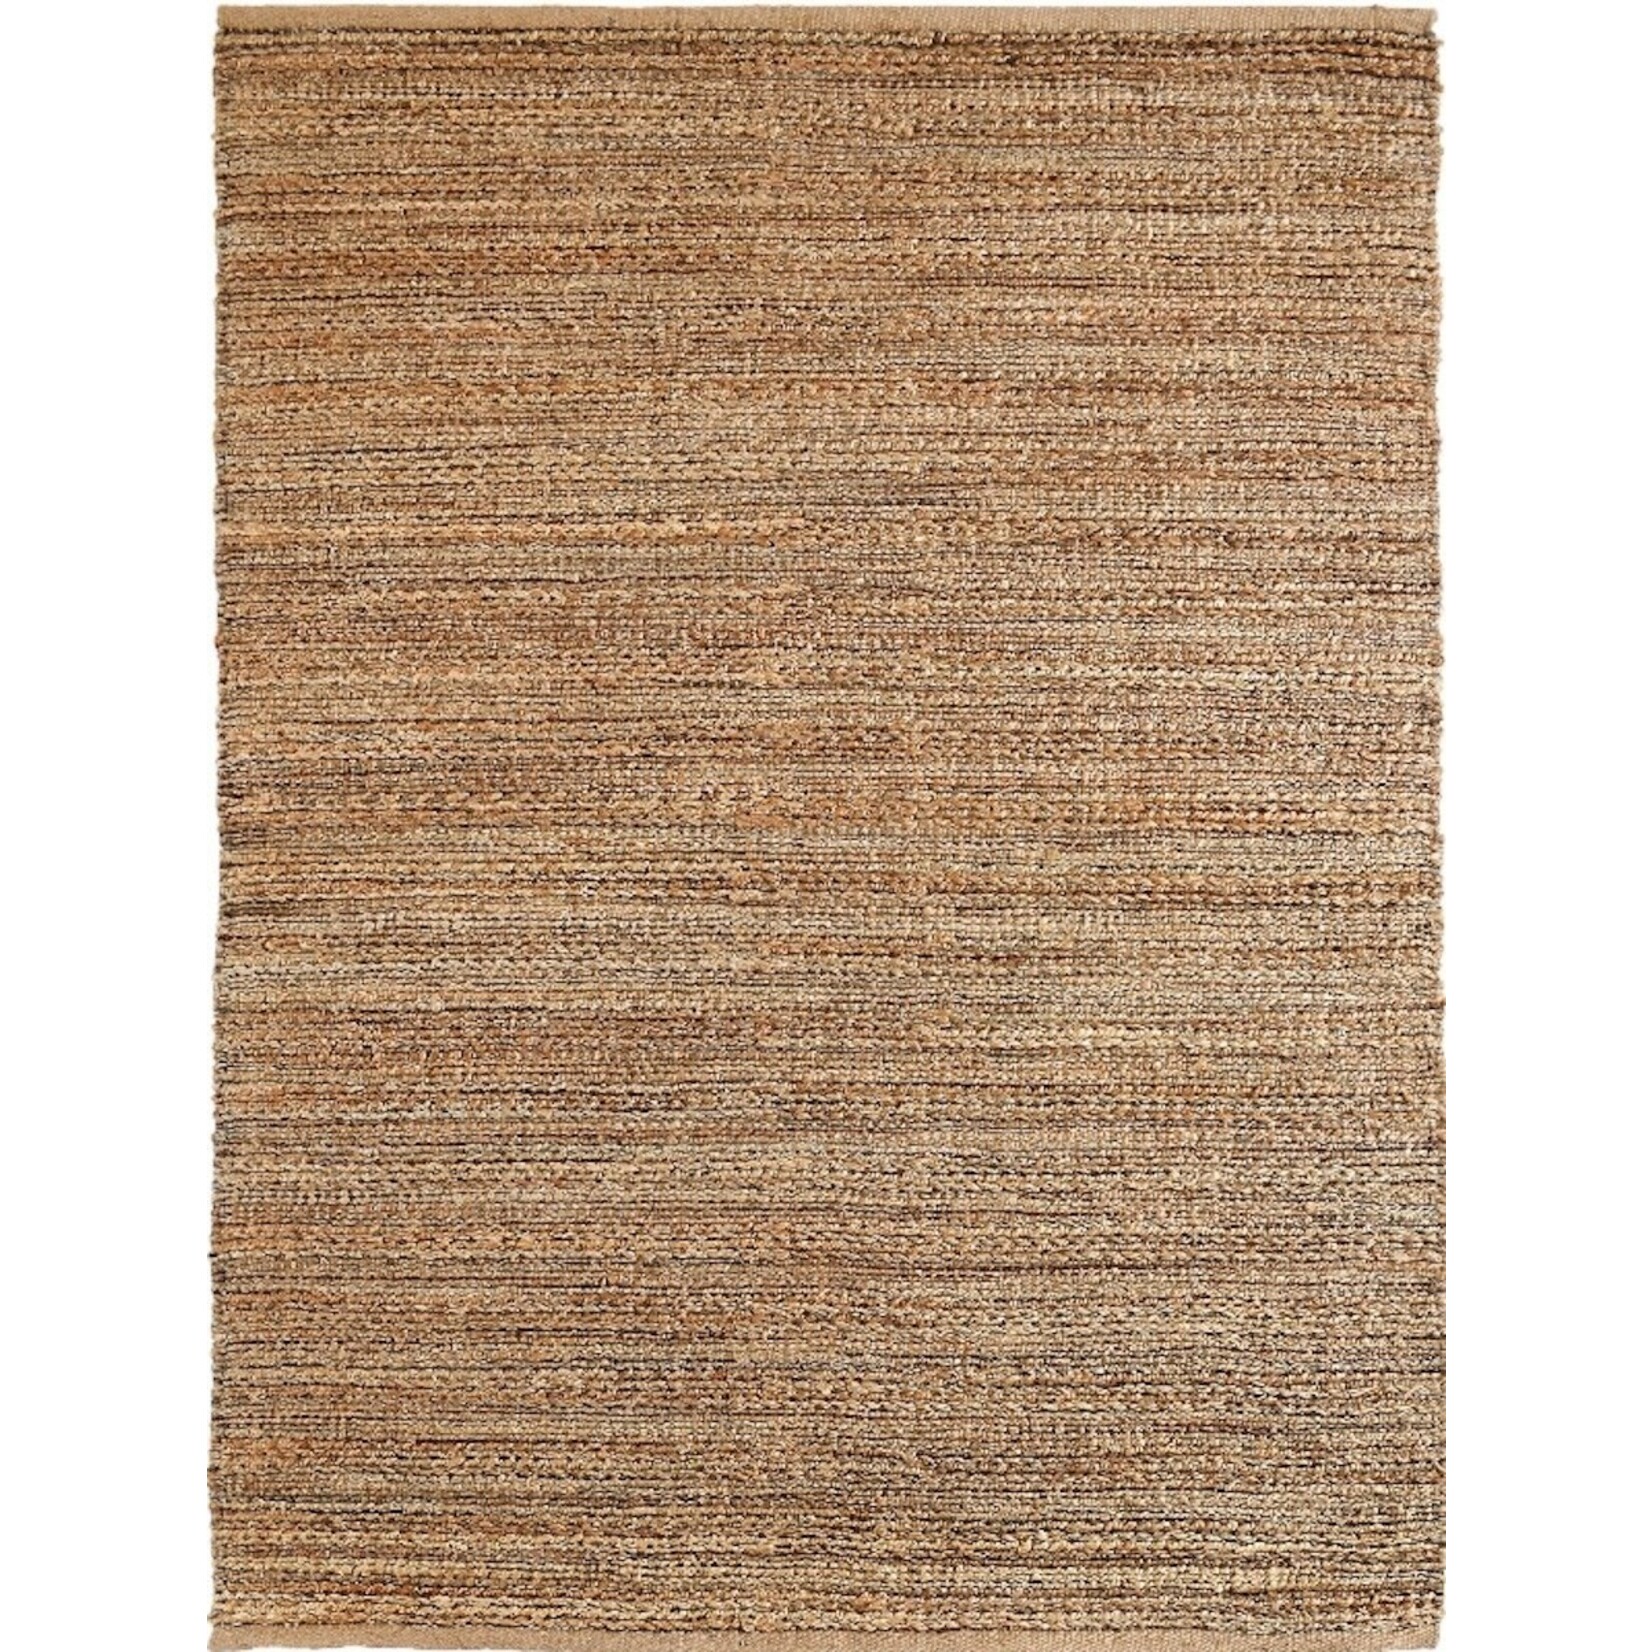 Outside The Box 9' x 12' Natural Fiber Jute / Rayon Chenille Blend Area Rug In Biscay - 03302